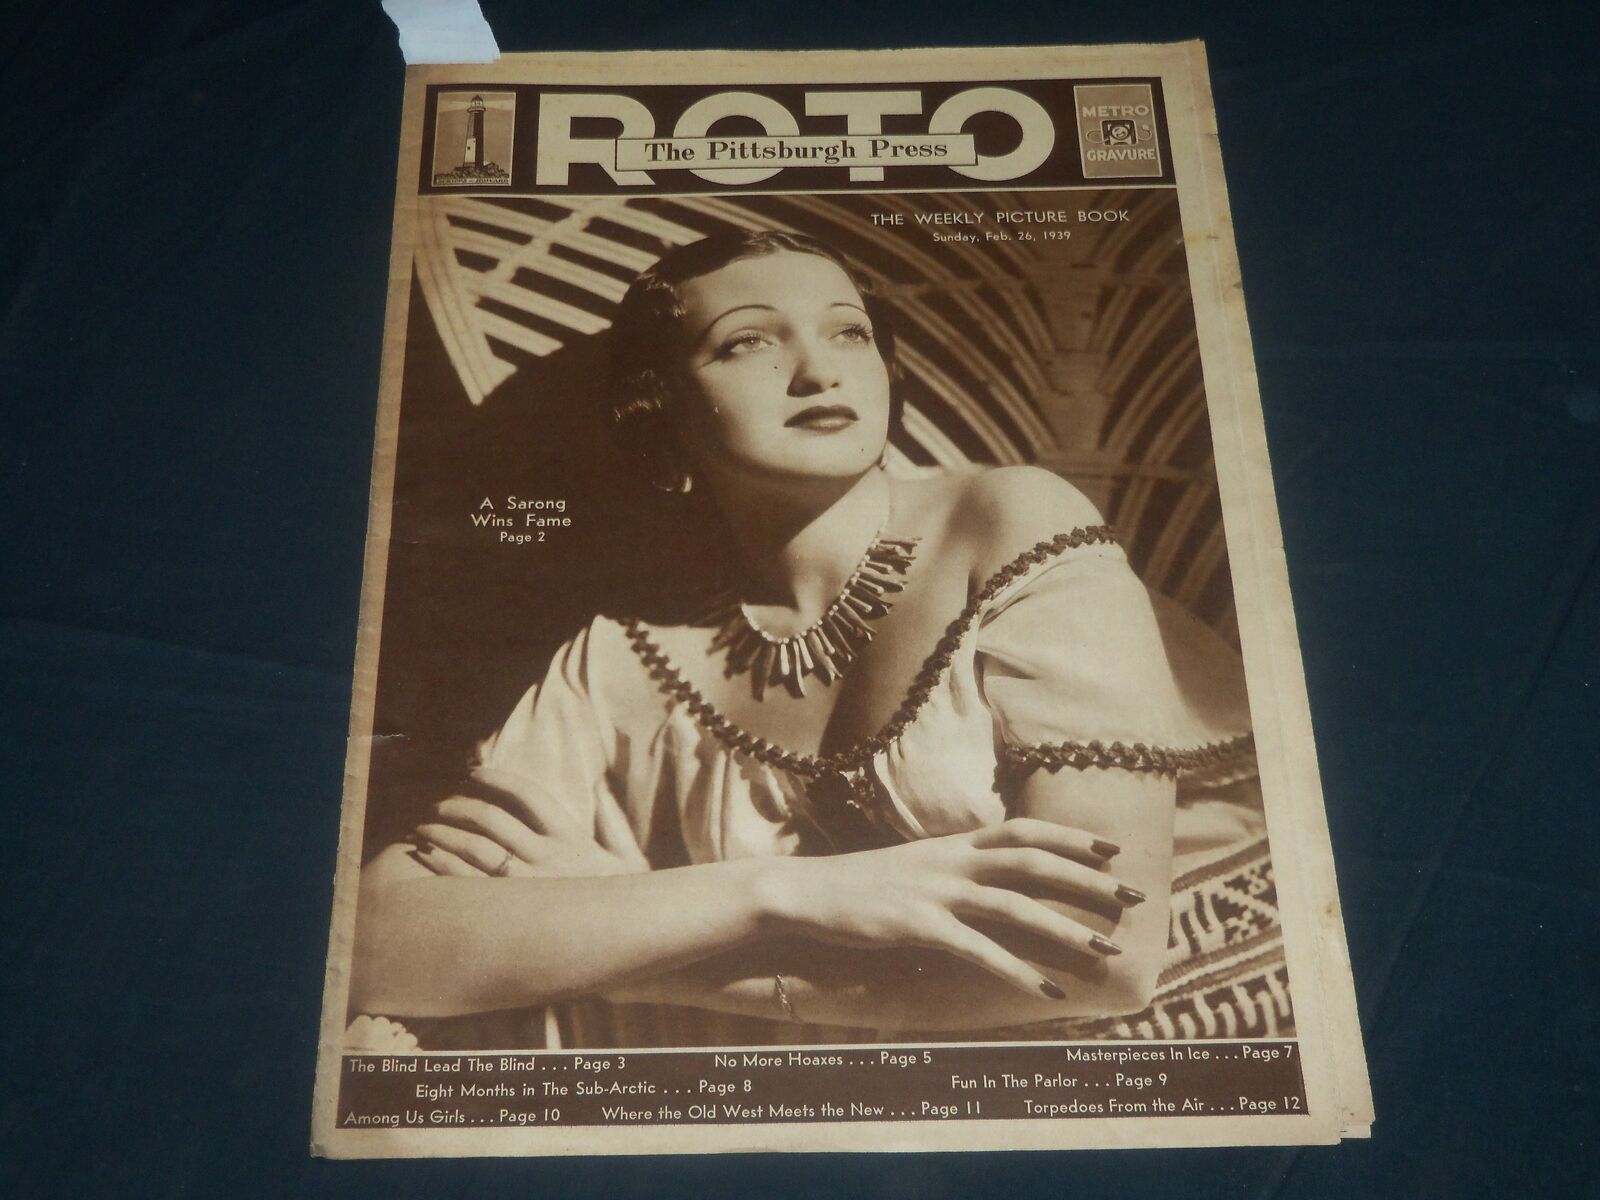 1939 FEBRUARY 26 PITTSBURGH PRESS SUNDAY ROTO SECTION - DOROTHY LAMOUR - NP 4454